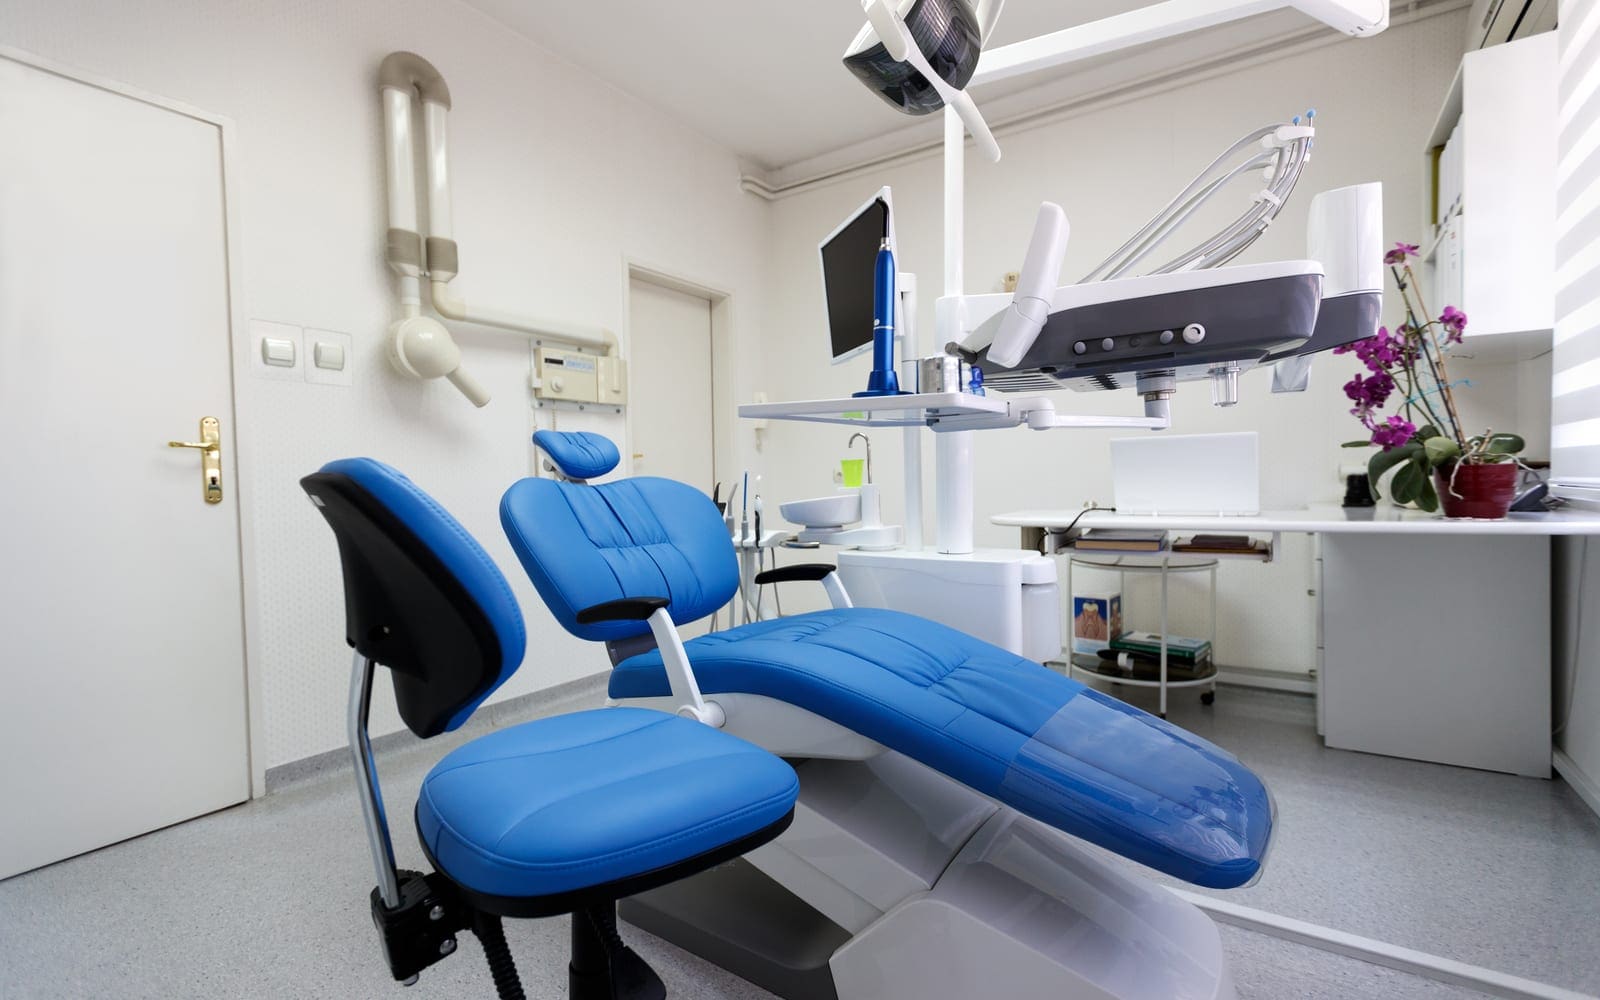 Dental chair upholstery service south florida